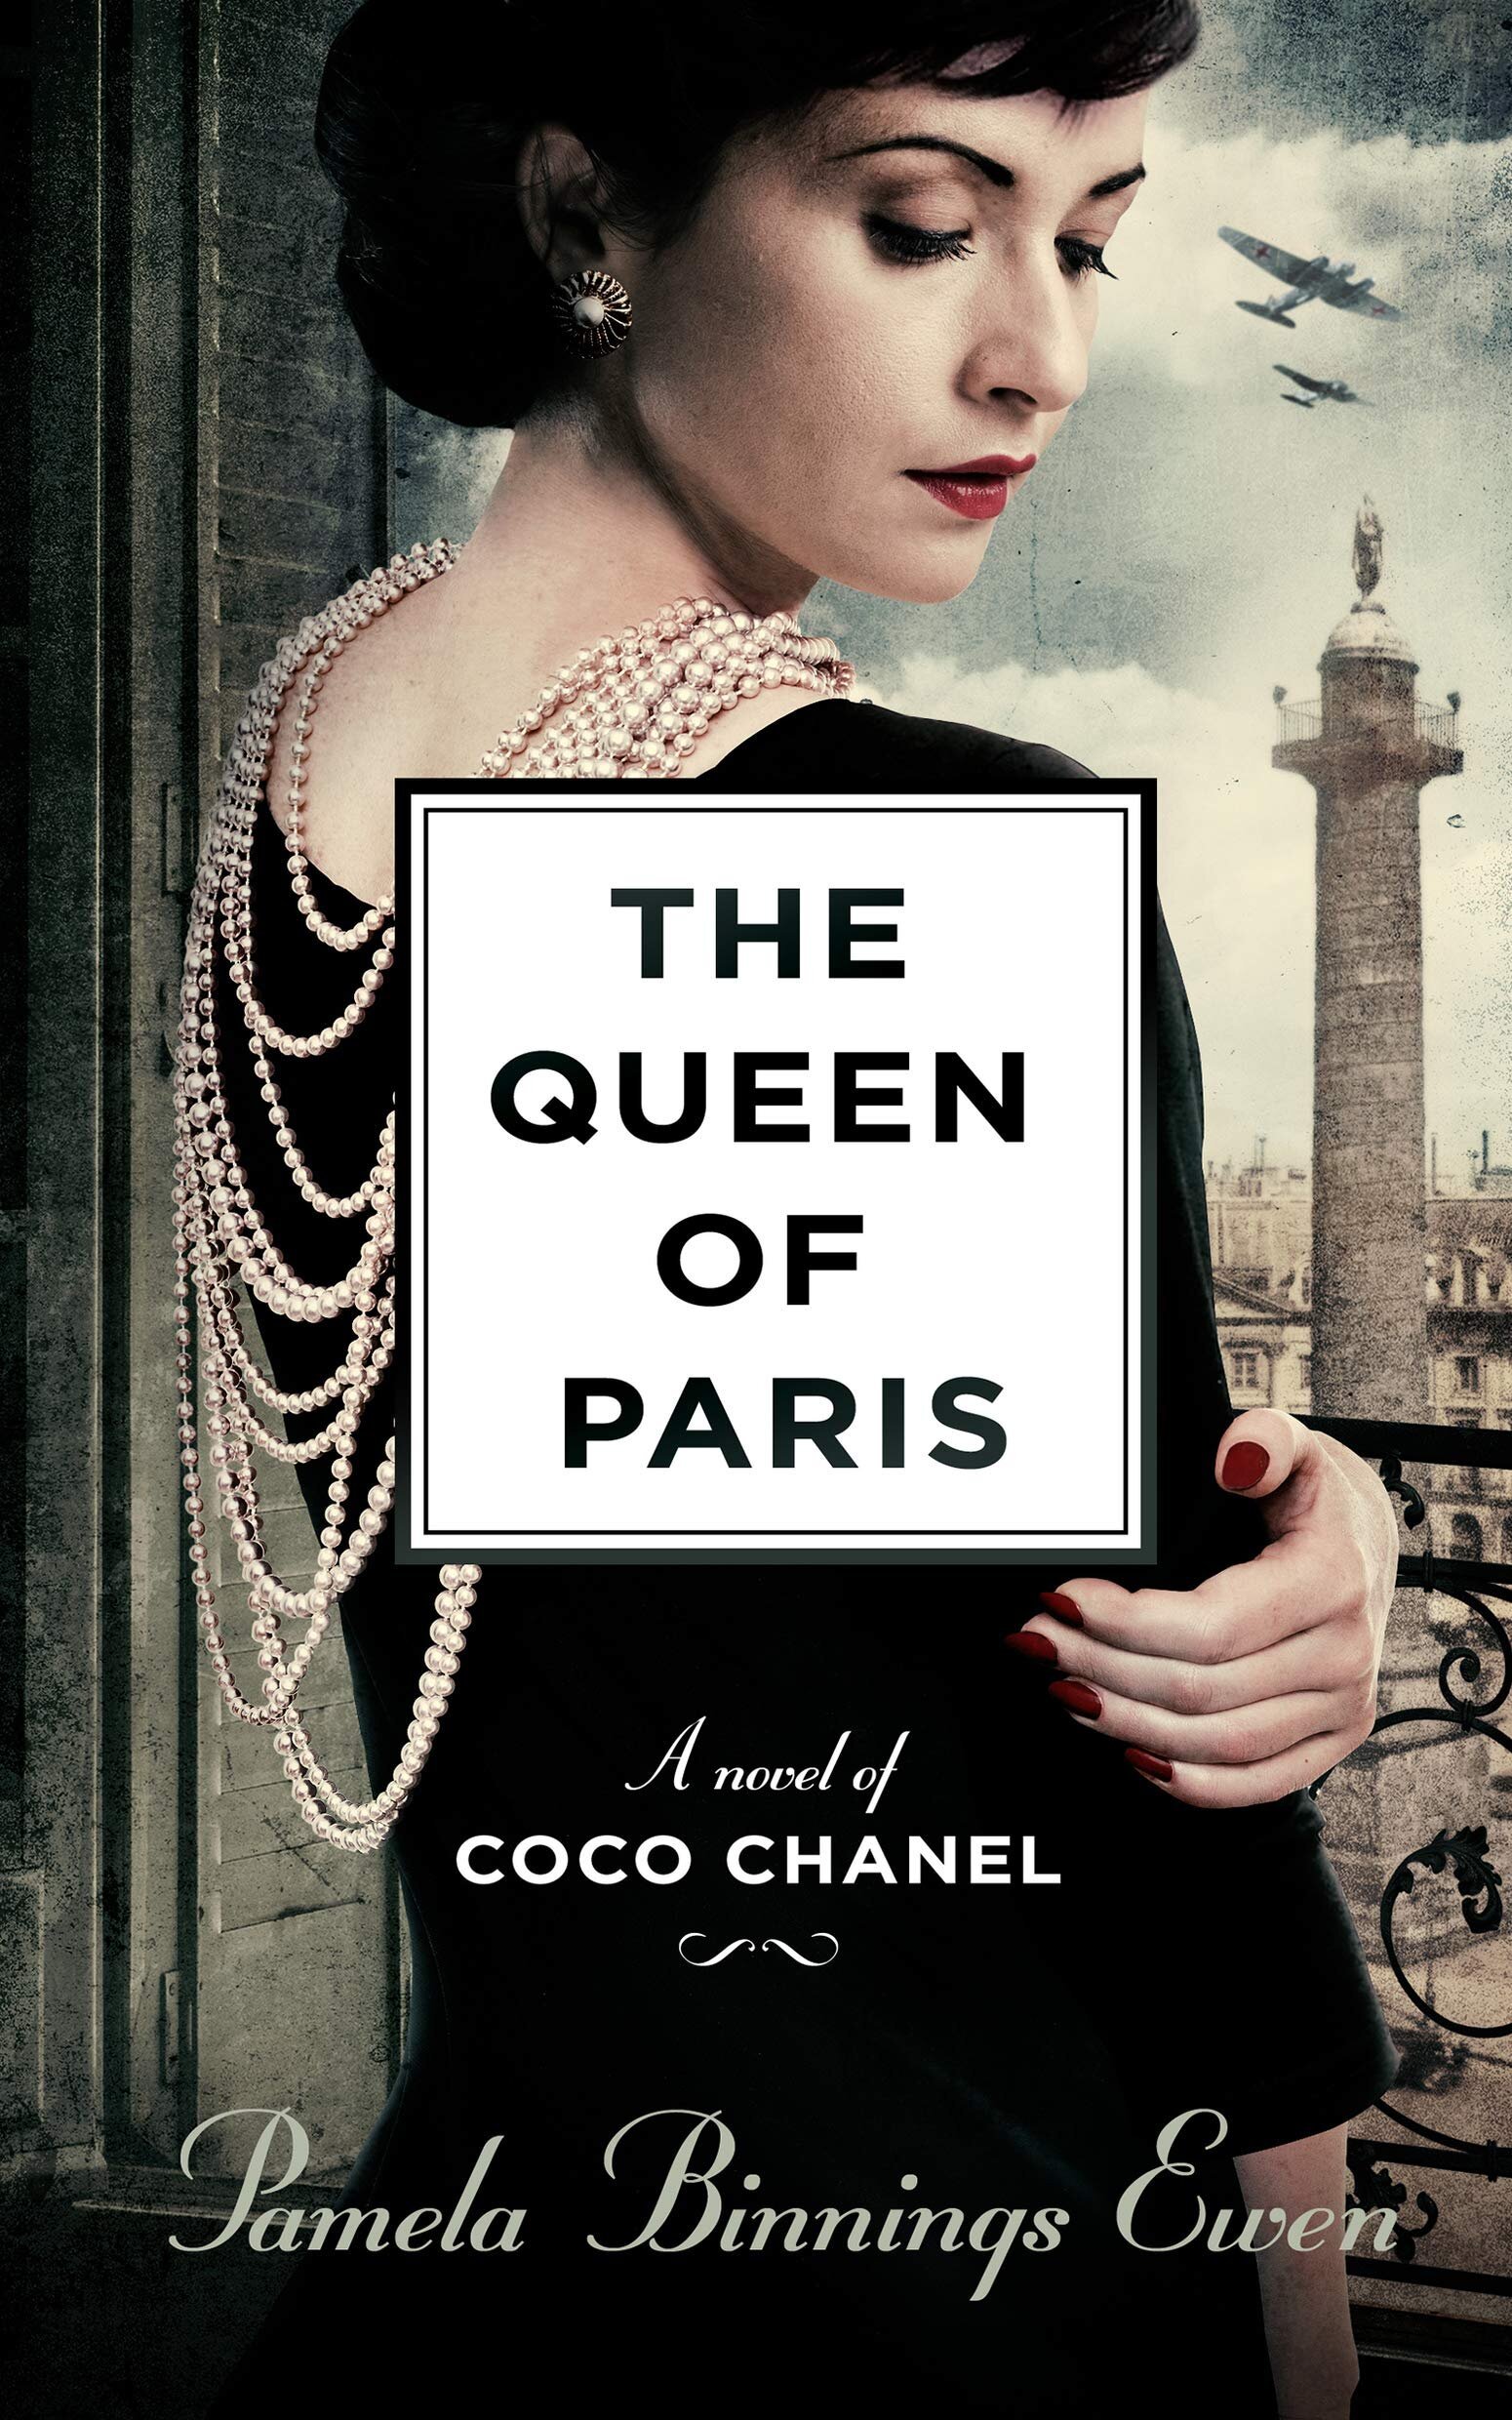 5 Books About Coco Chanel